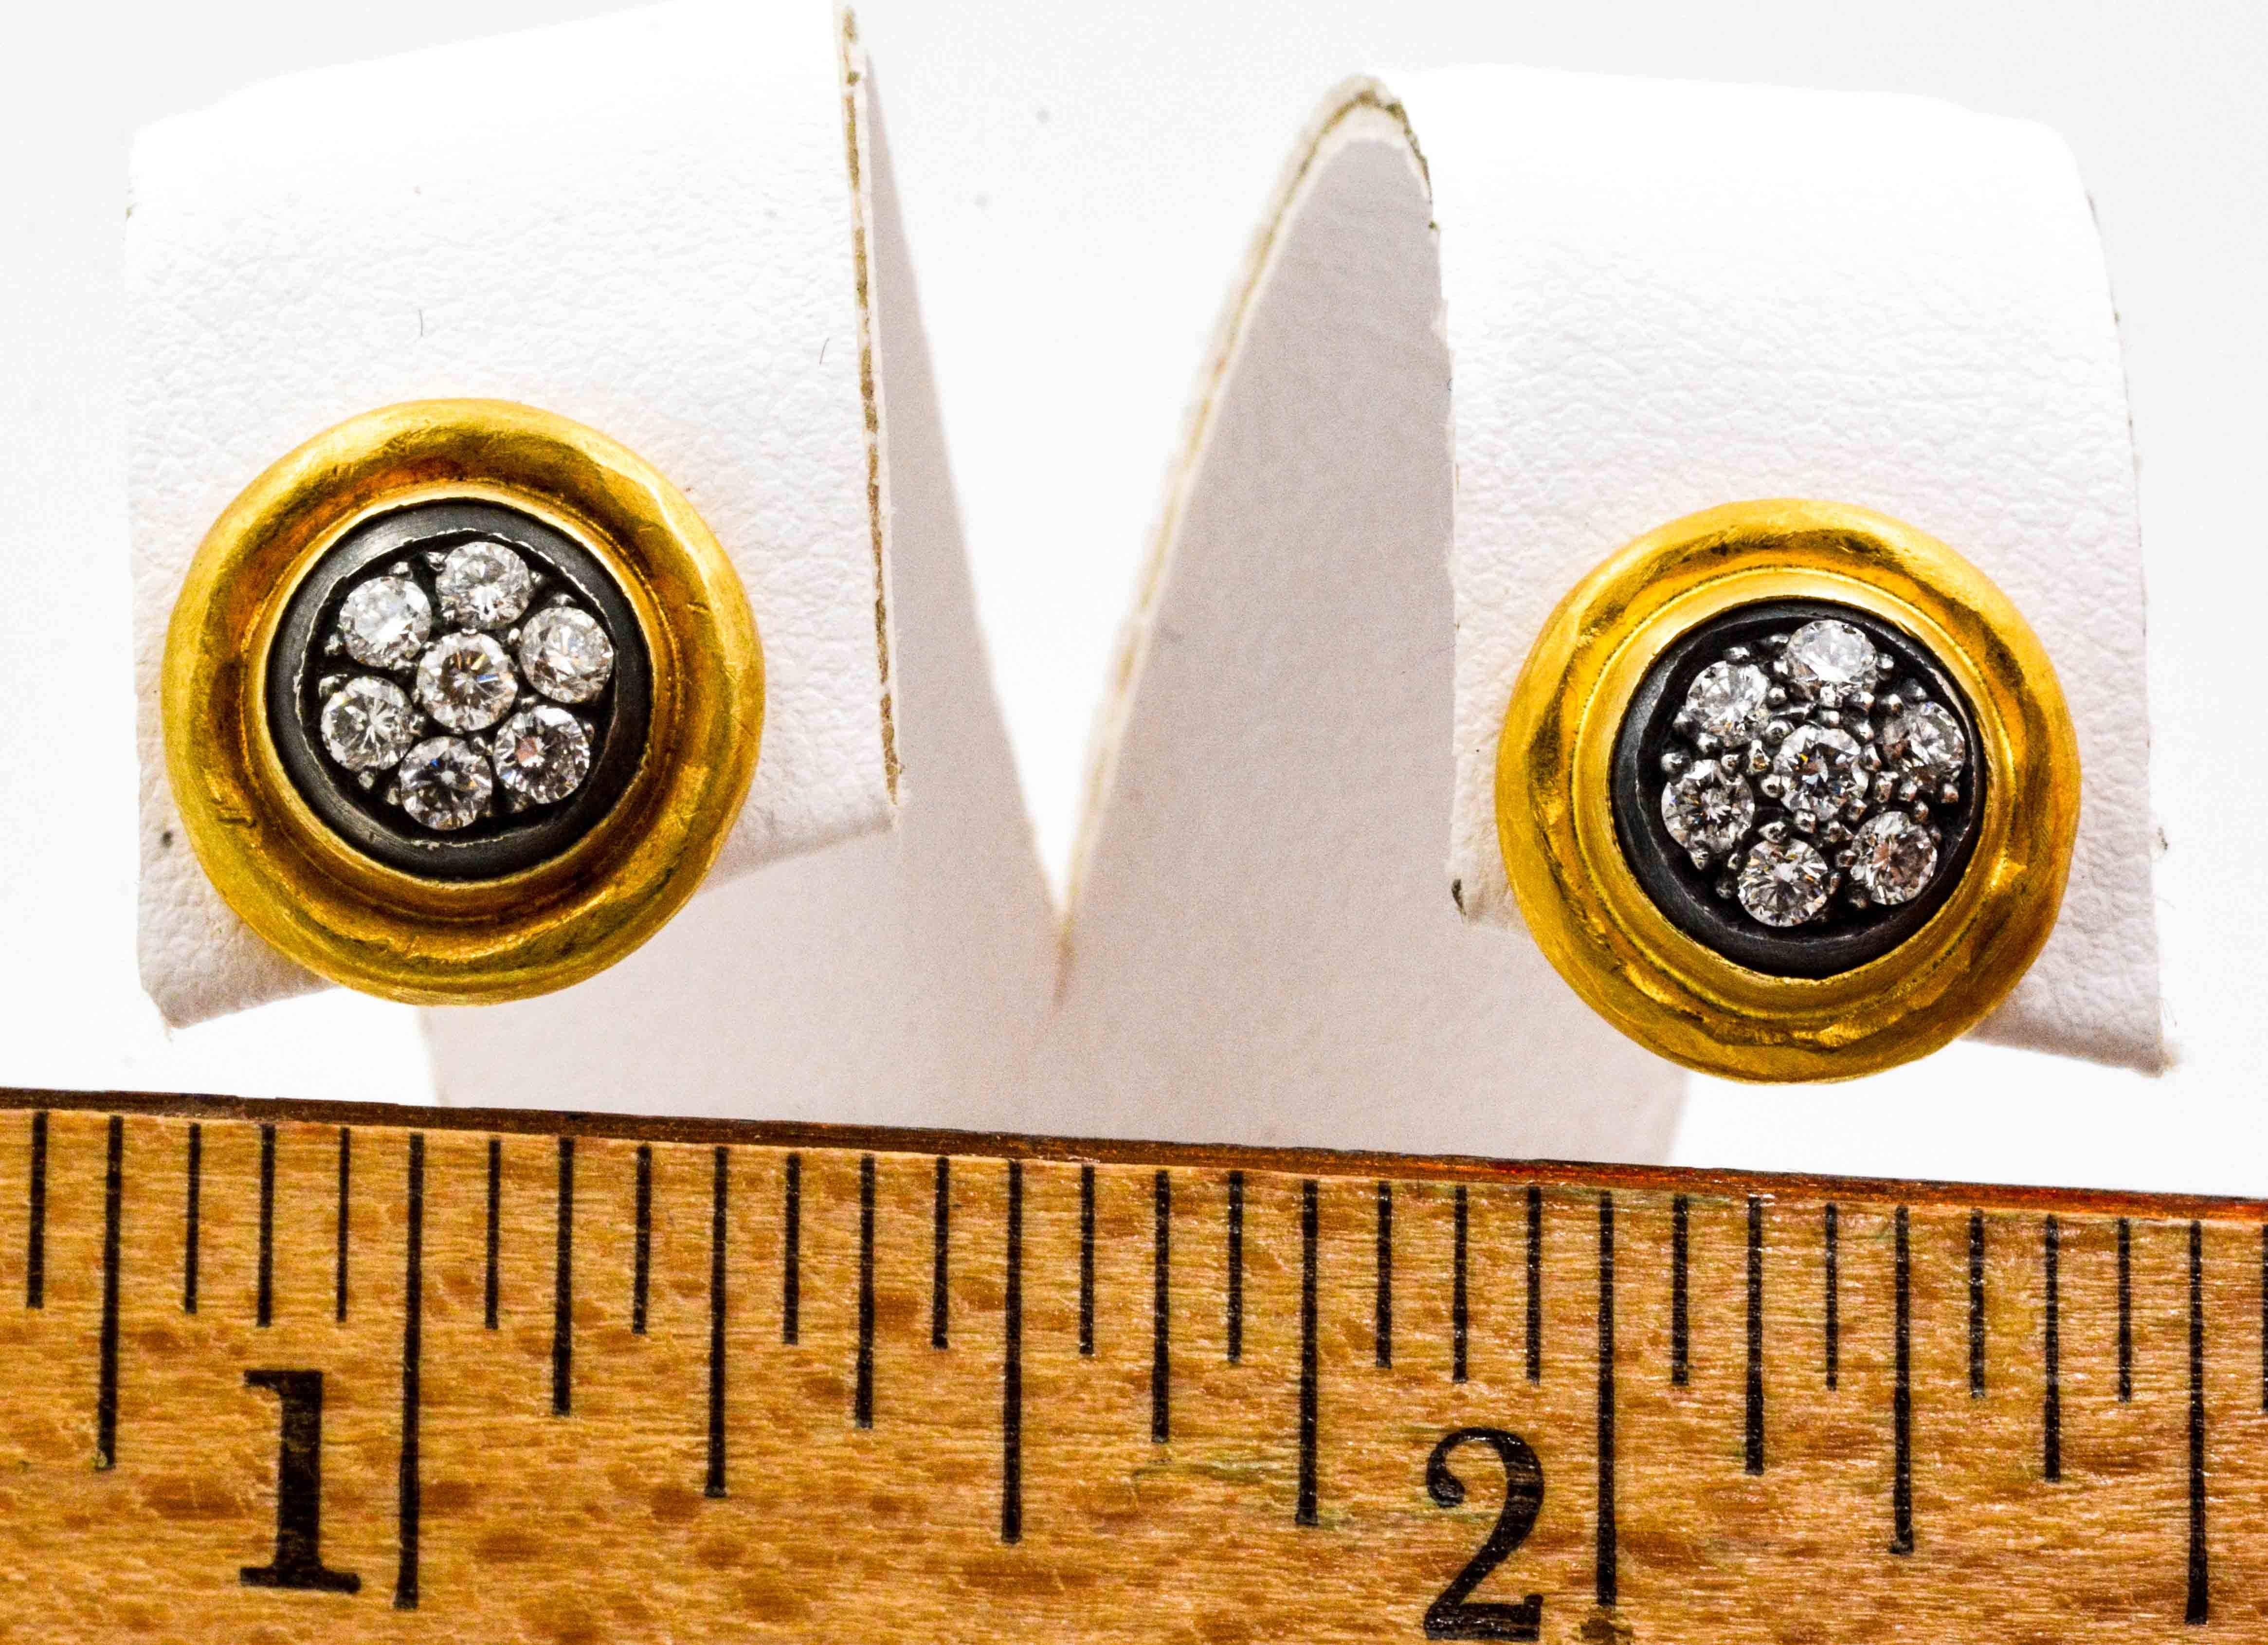 Created in the Etruscan design with vitality and vivid coloring, these 24 kt yellow gold with oxidized sterling silver stud earrings are simply irresistible.  The 24 kt gold appears brighter than the sun matched against the oxidized silver. Fourteen